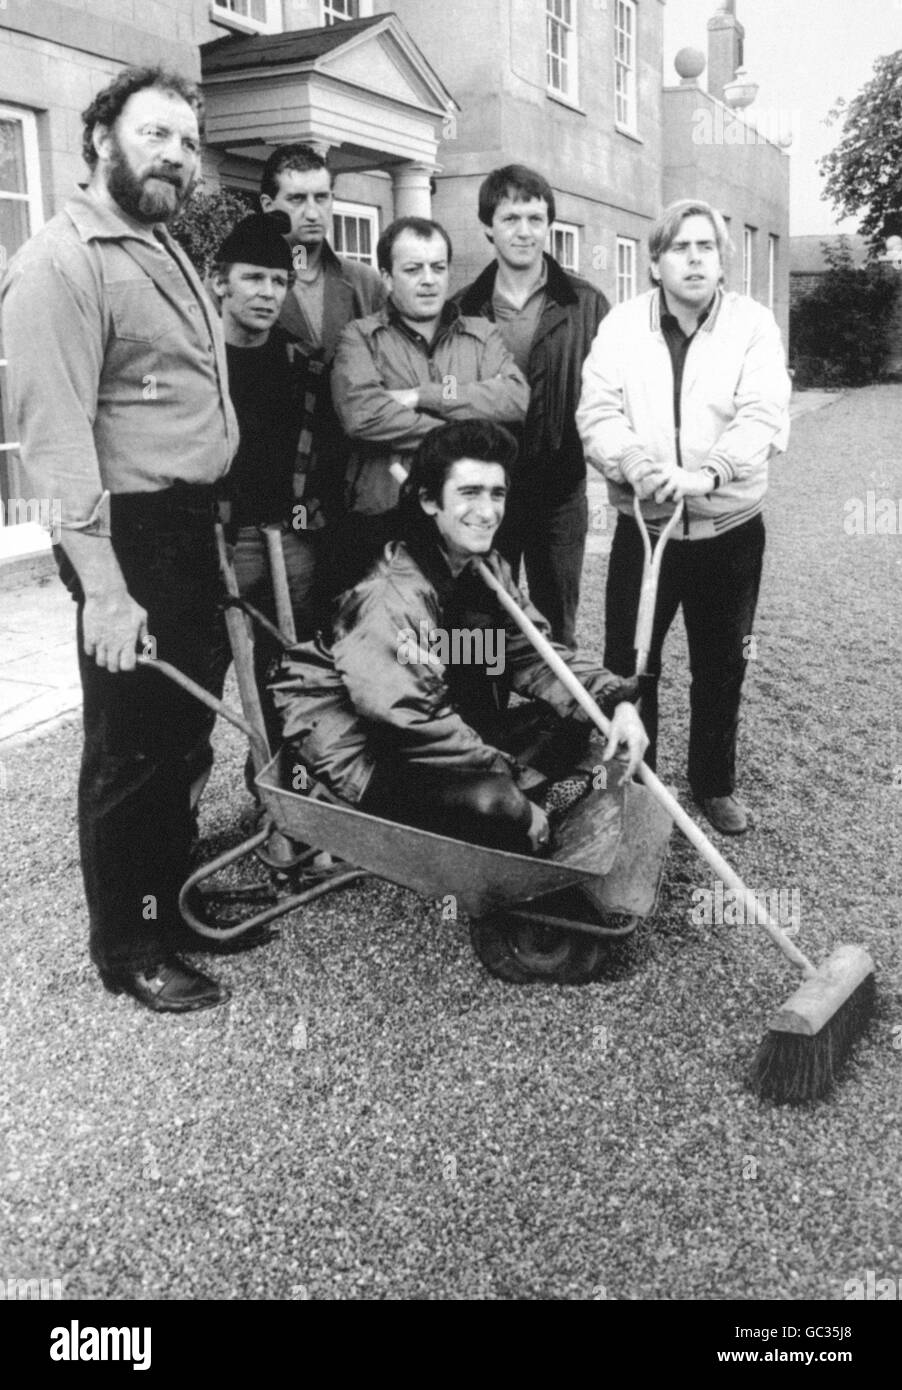 'Auf Wiedersehen Pet' actor Gary Holton (33), who is pictured with the rest of the cast, (he is sitting in the wheelbarrow), has died at an address in North London. Stock Photo